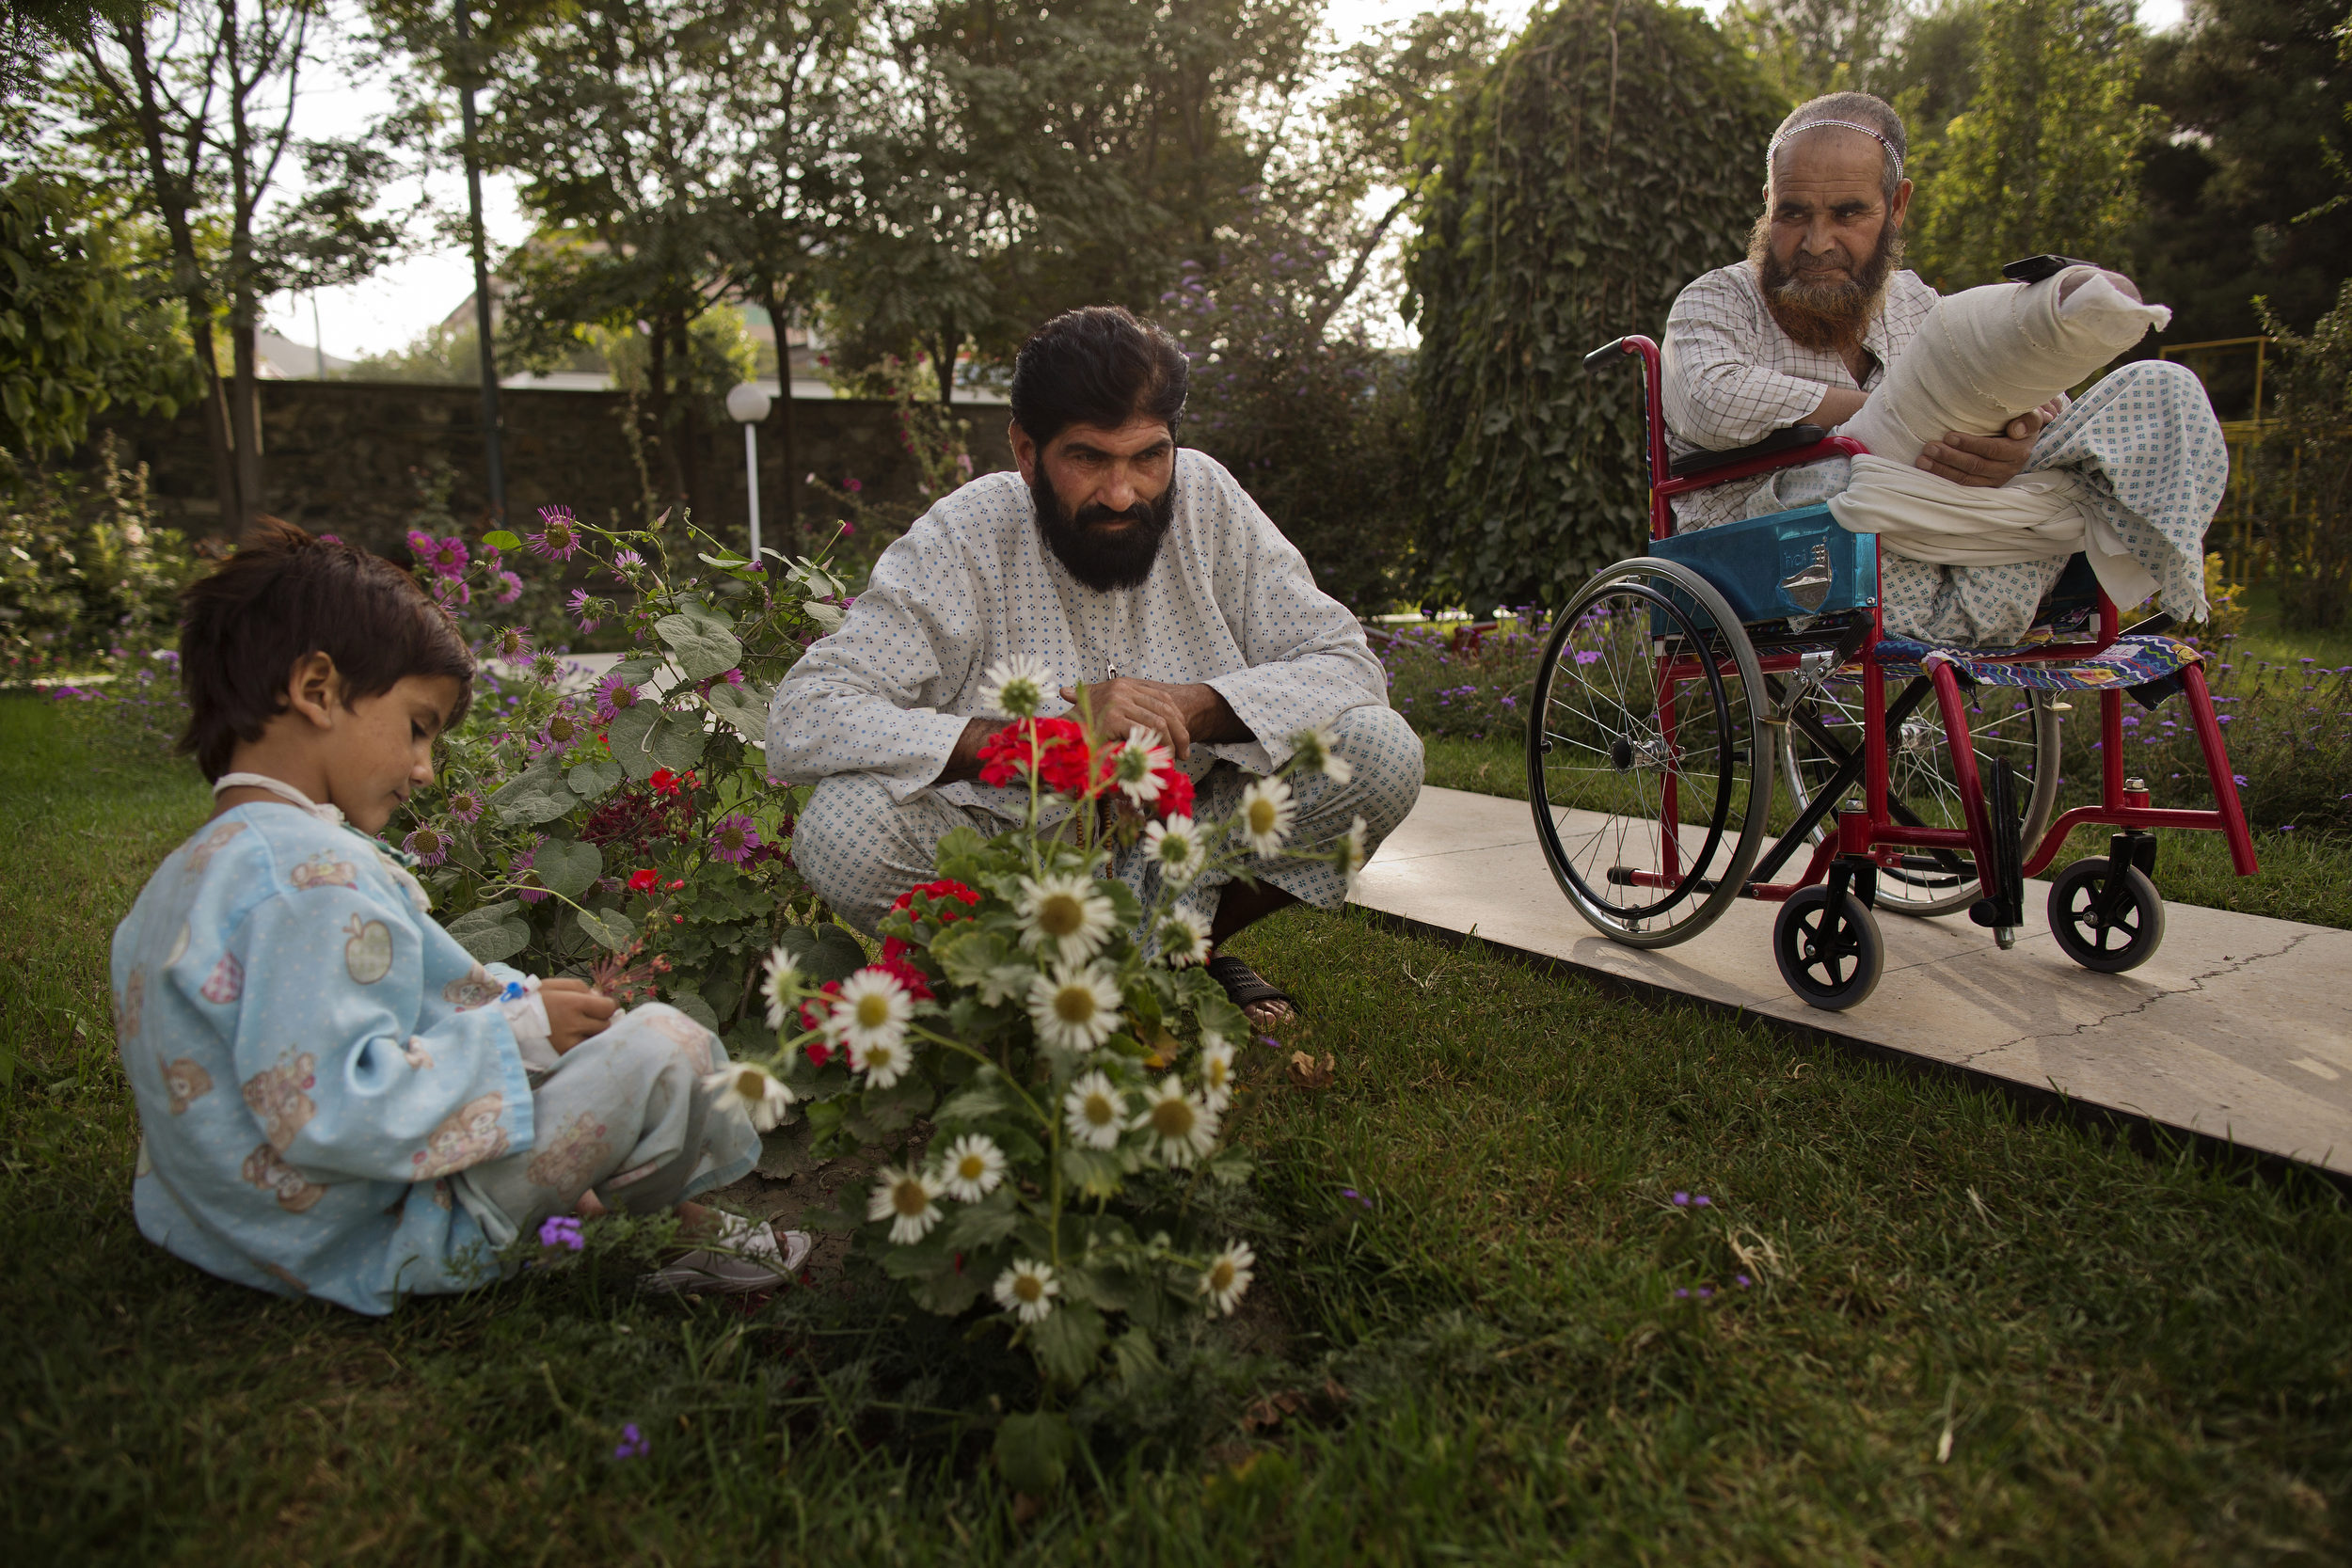  Noor Pacha sits in the garden with his injured son Noorullah, 7, and fellow patient Ab Ahad. 